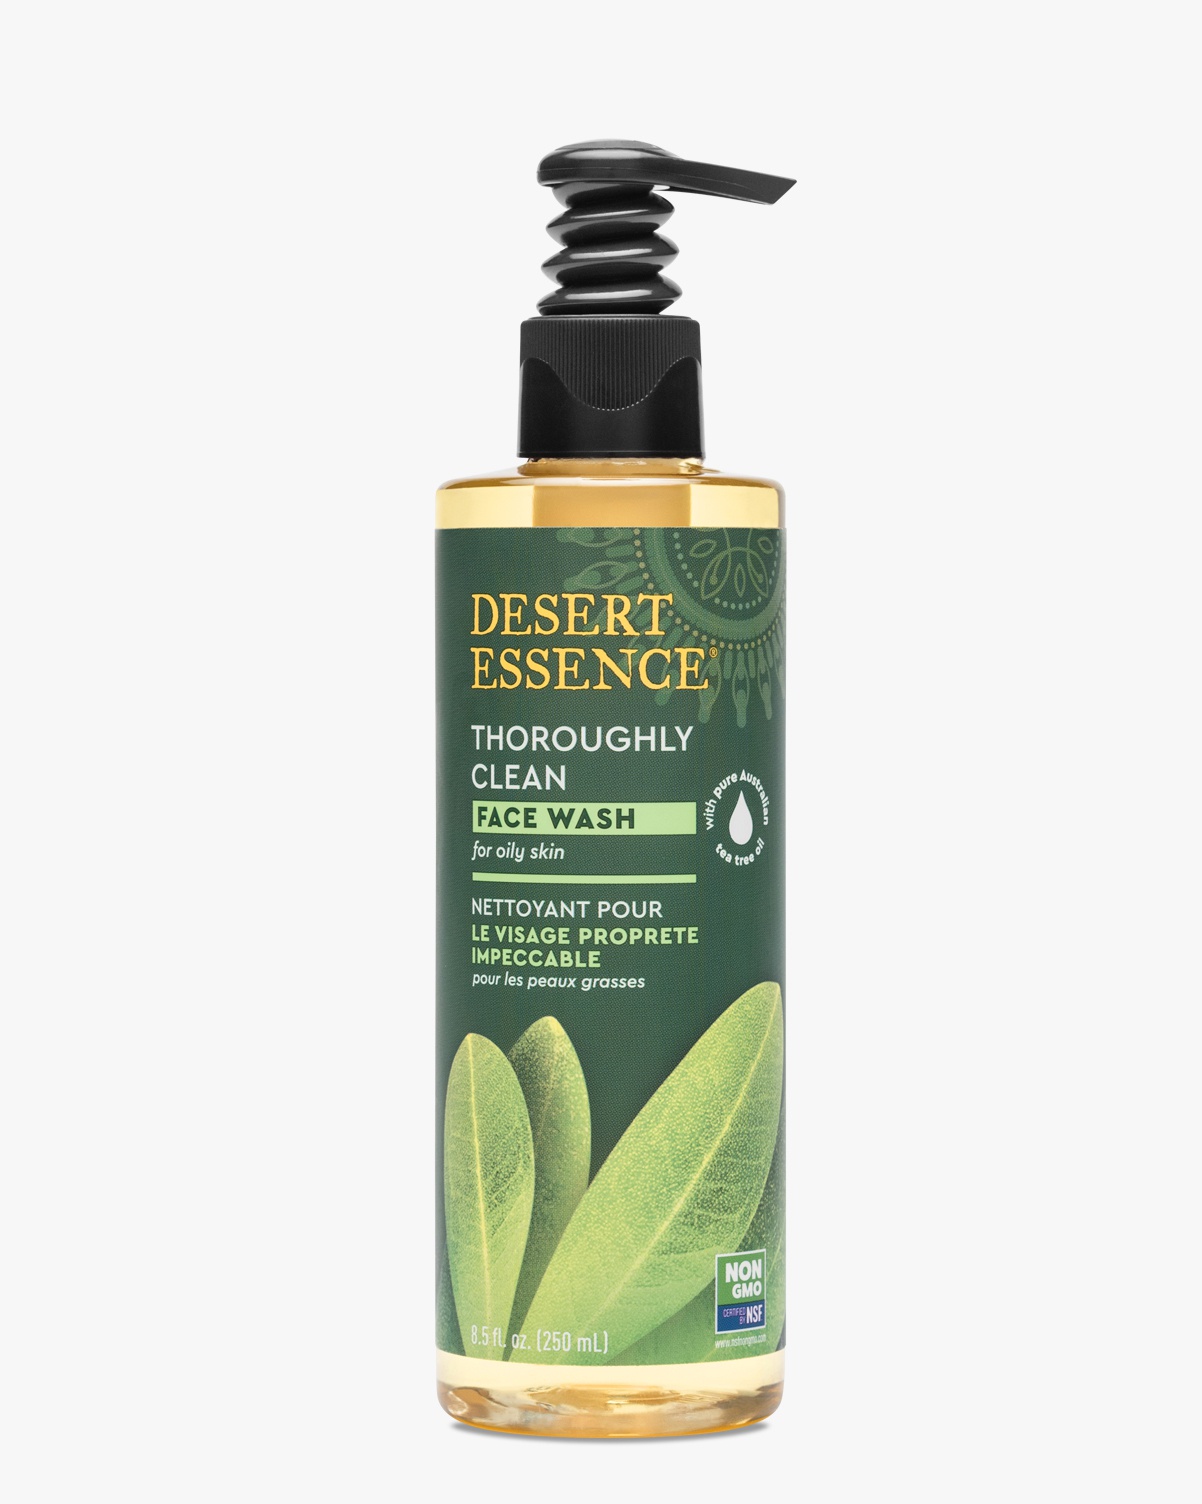 Desert Essence Thoroughly Clean Face Wash with Tea Tree Oil